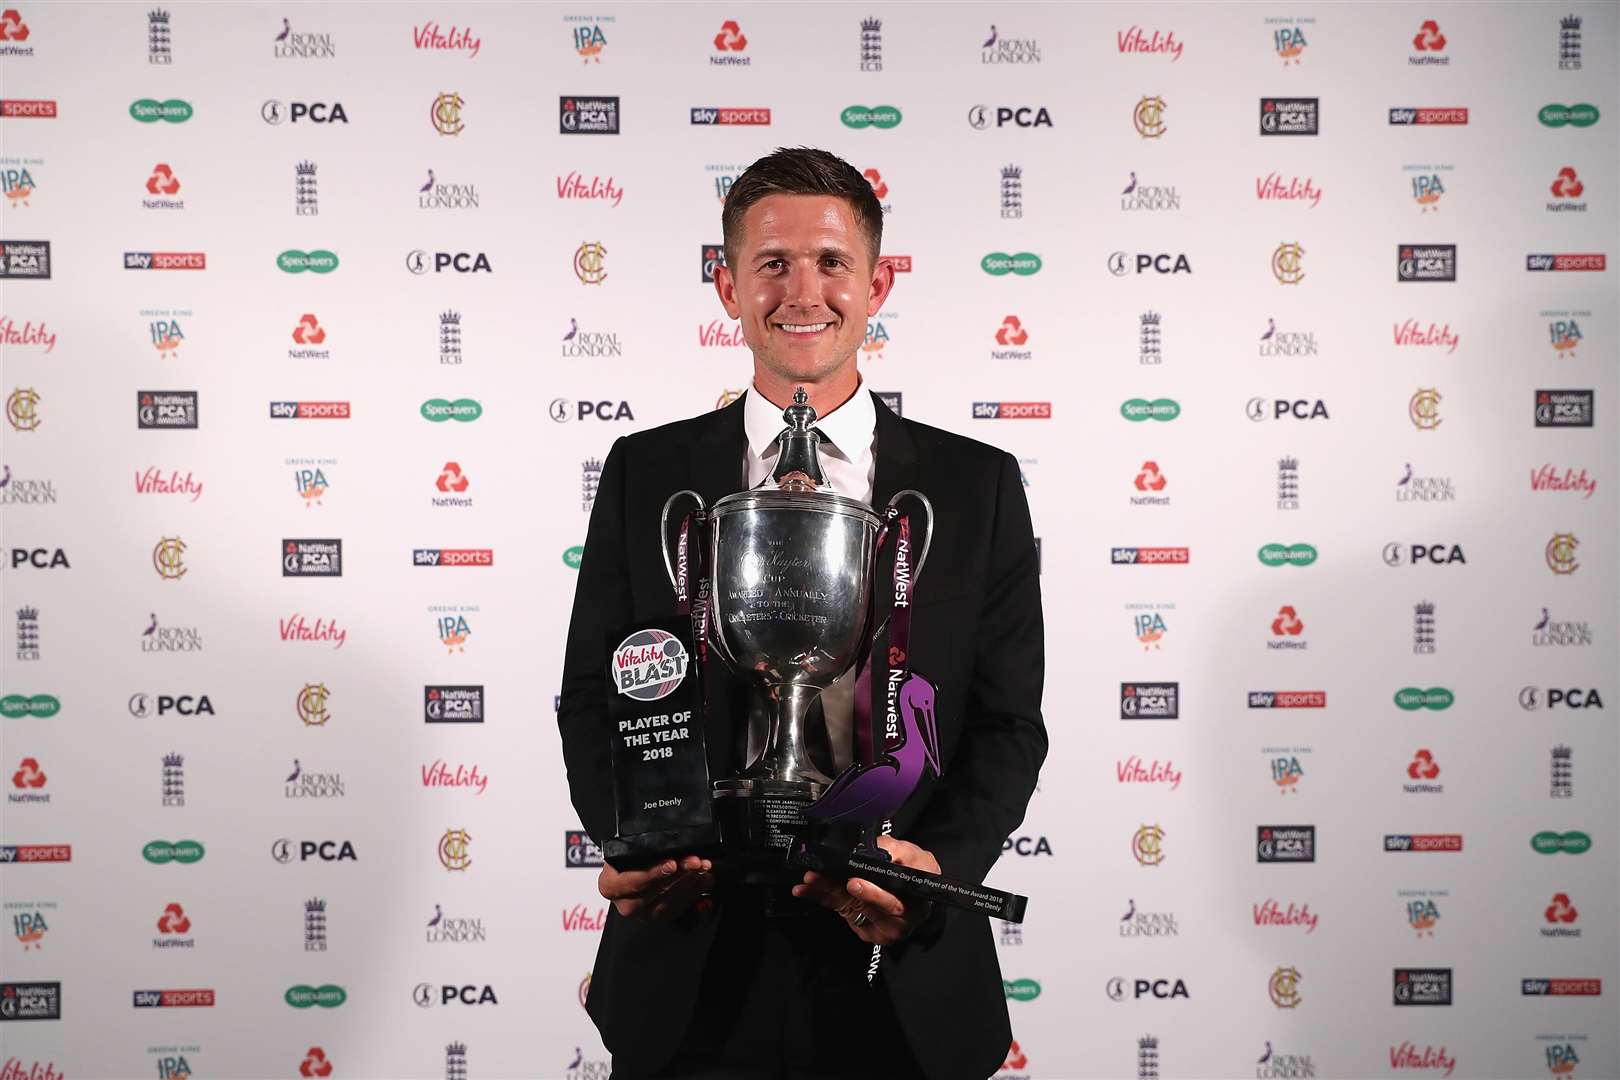 Kent's Joe Denly with the Vitality Blast and Royal London One-Day Player-of-the-Year trophies during the NatWest PCA Awards